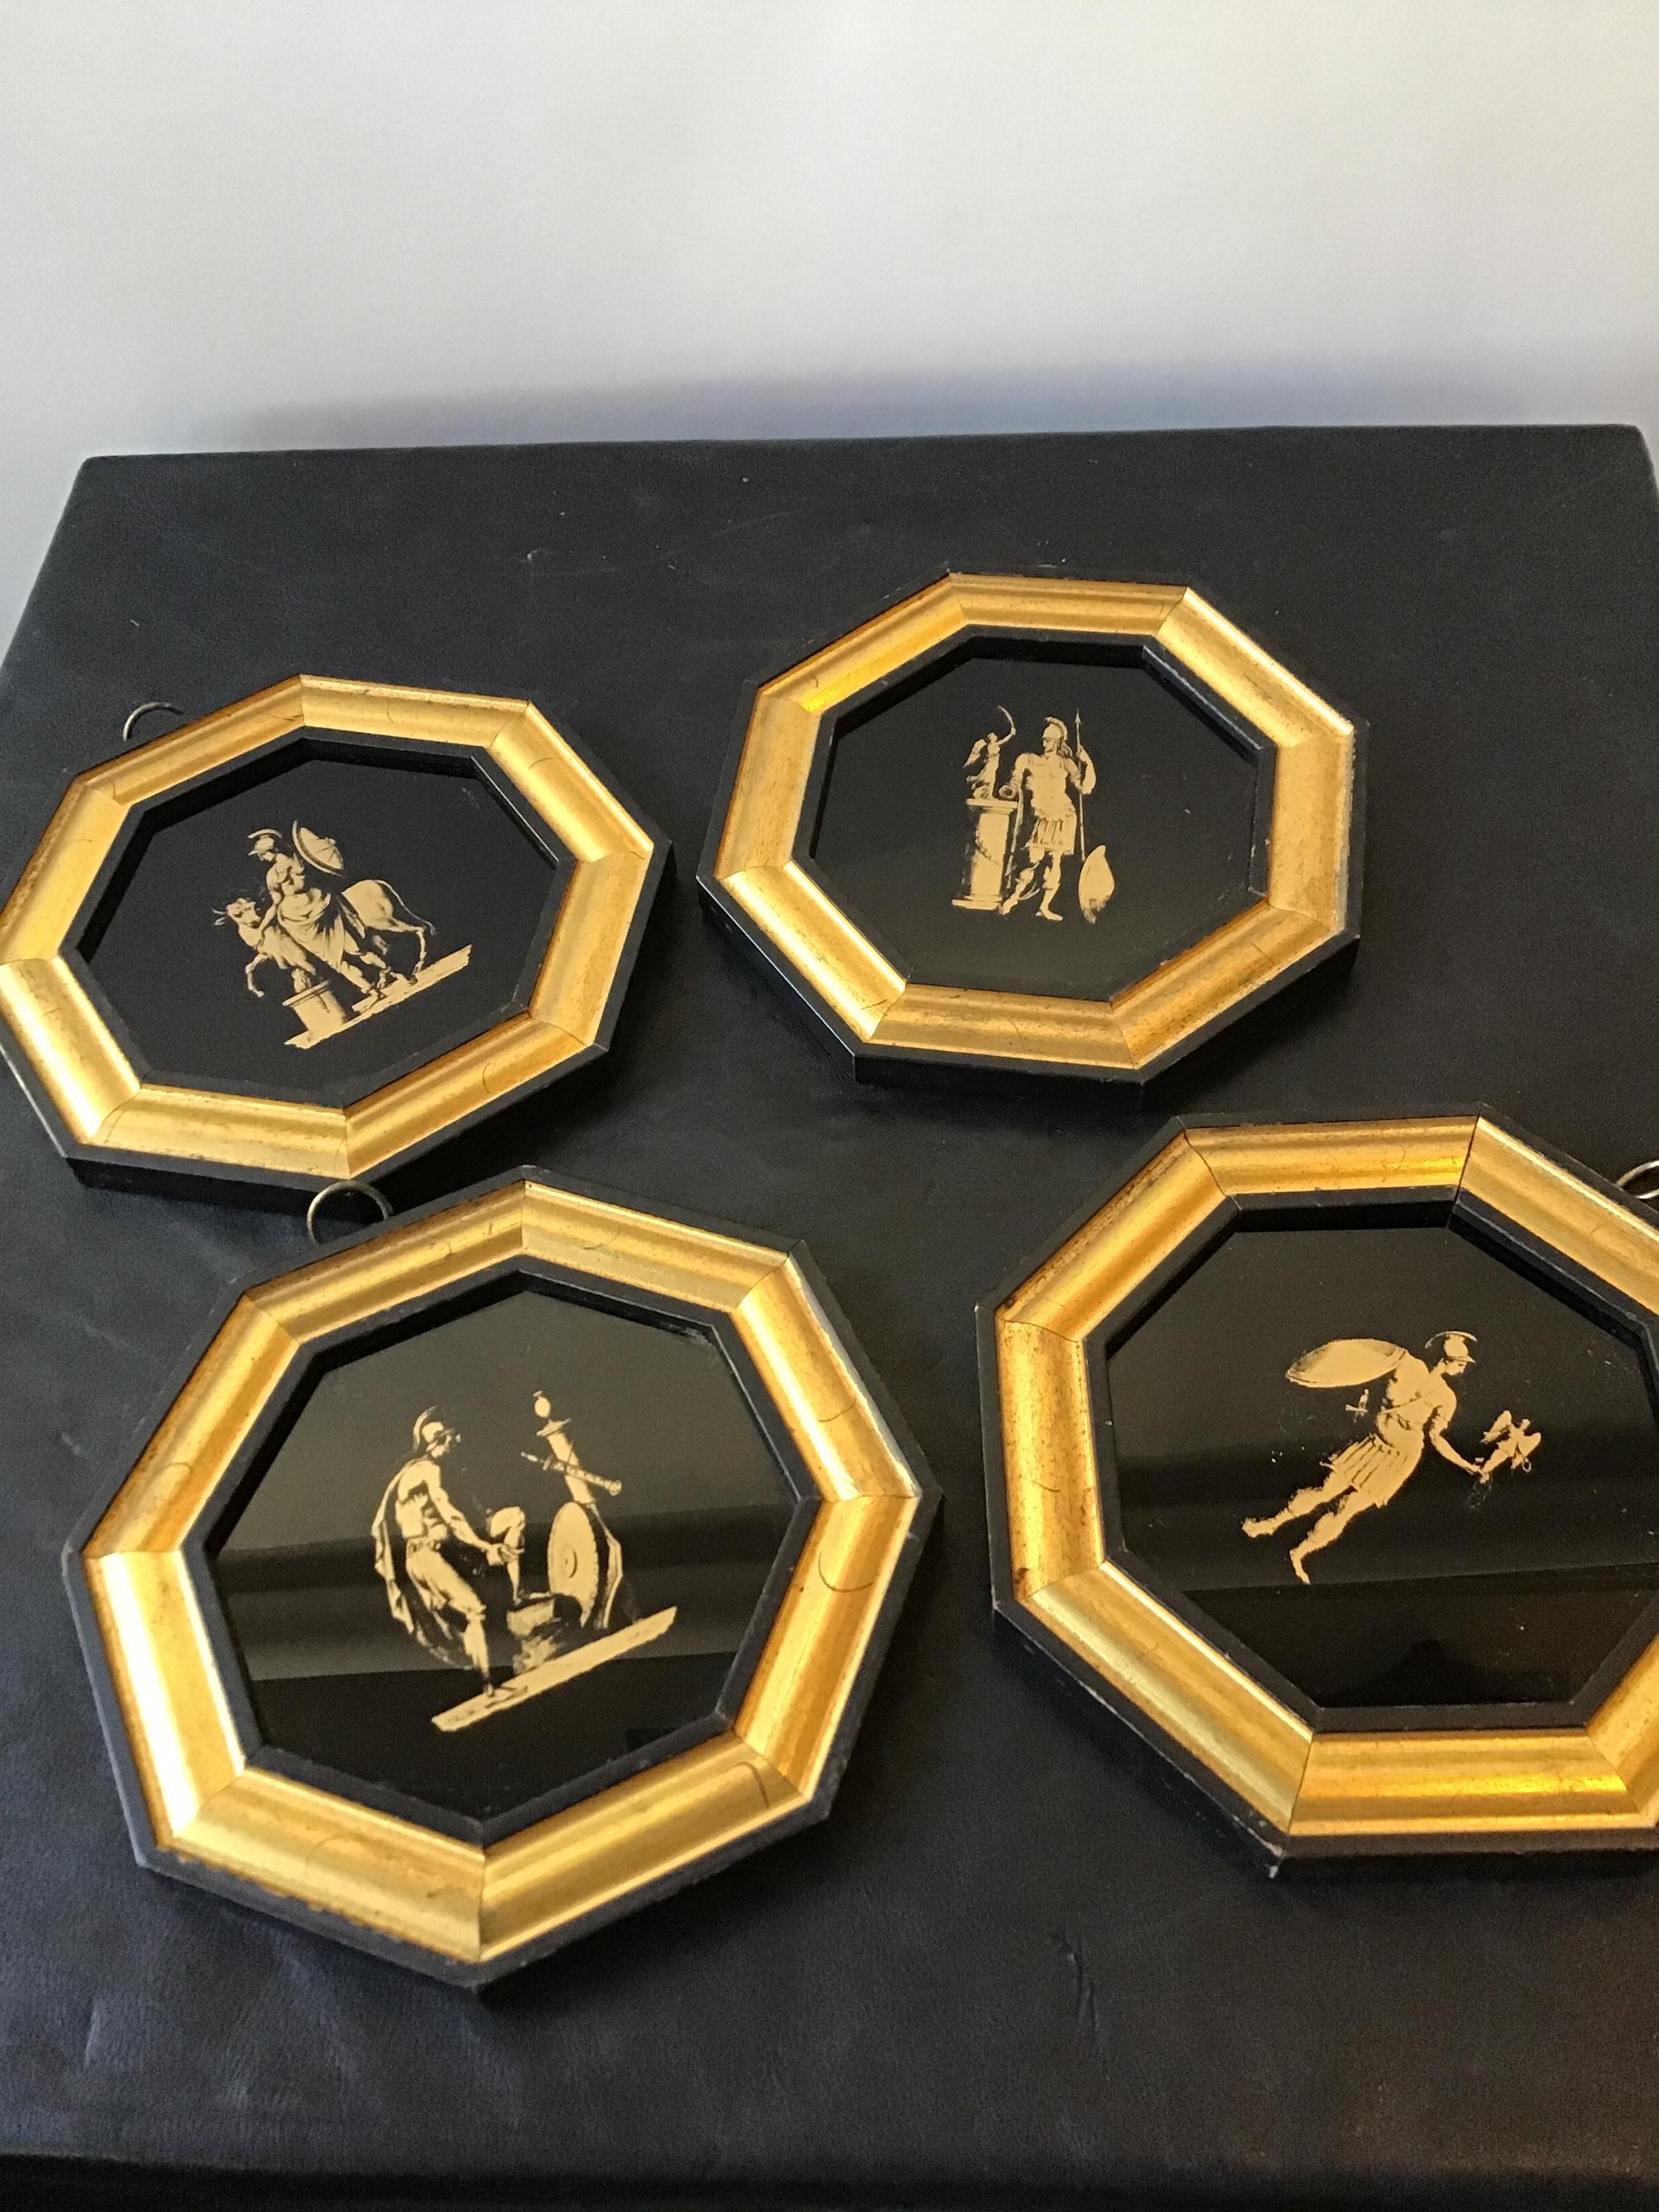 Four 1950s classical gold transfer ware pictures on glass of Roman soldiers. In gold wood frames.